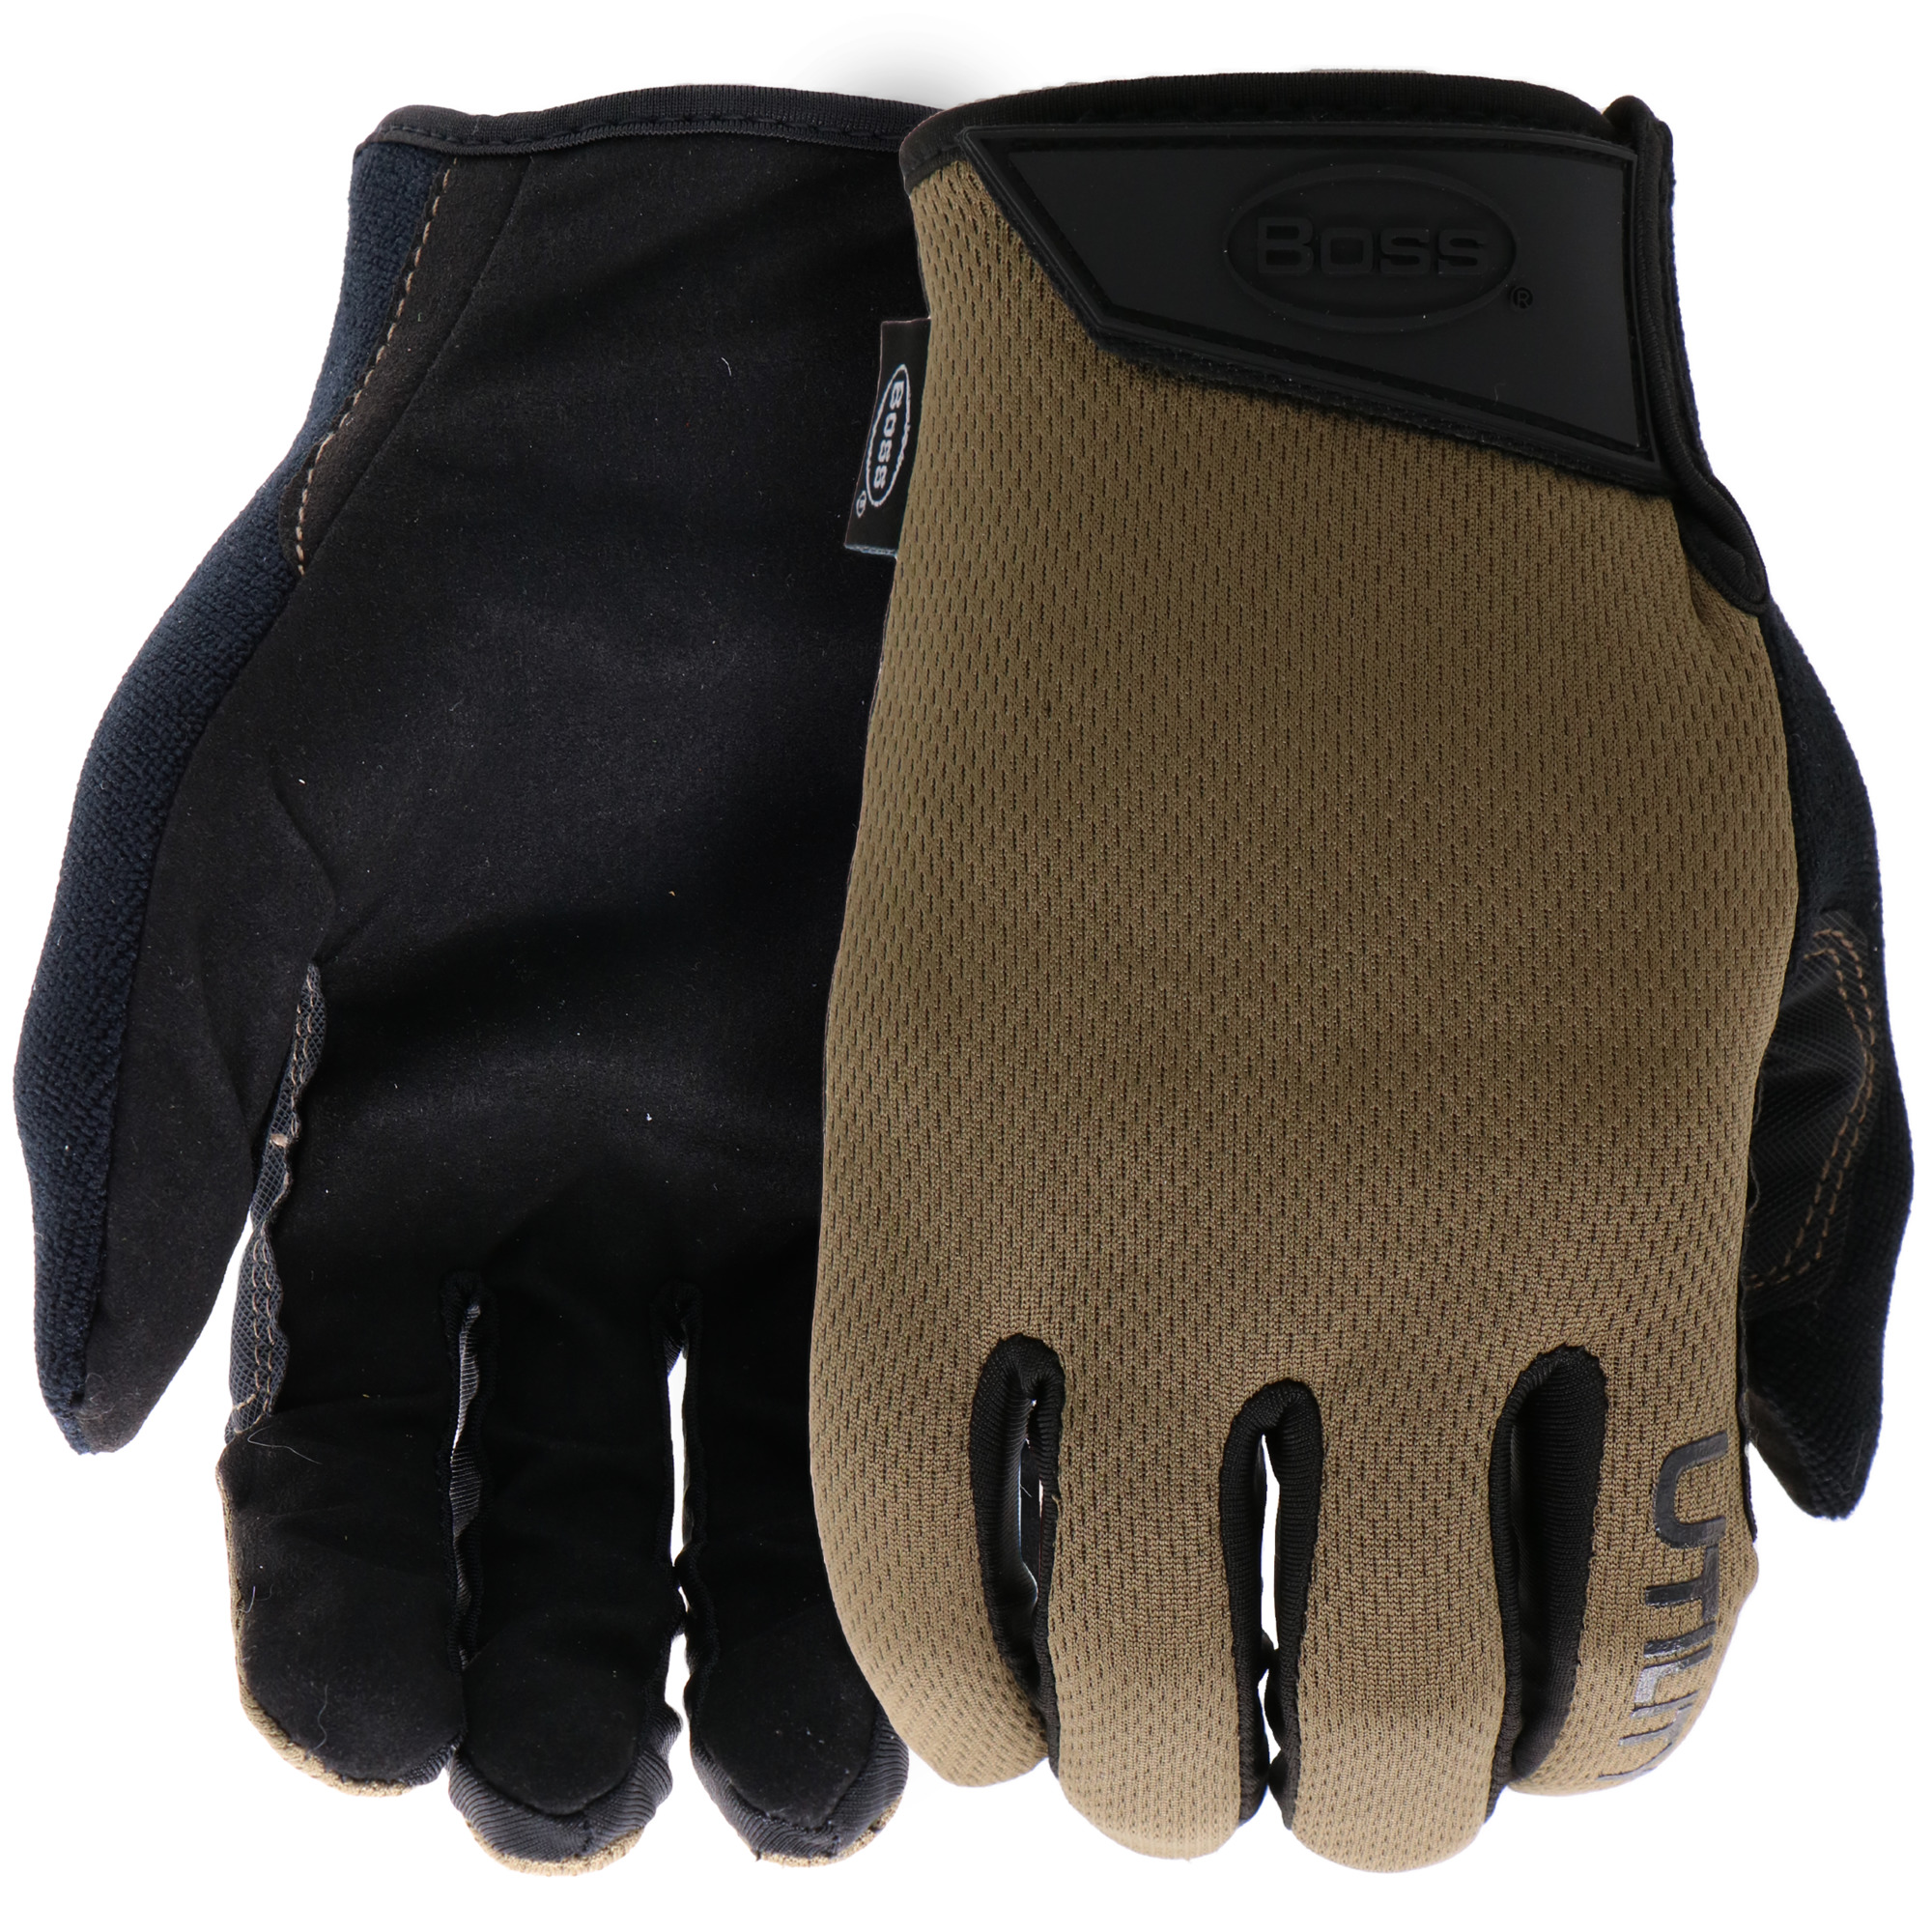 Boss, Hi-Performance Utility Glove with spandex back, Size XL, Color Black, Included (qty.) 1, Model B52001-XL